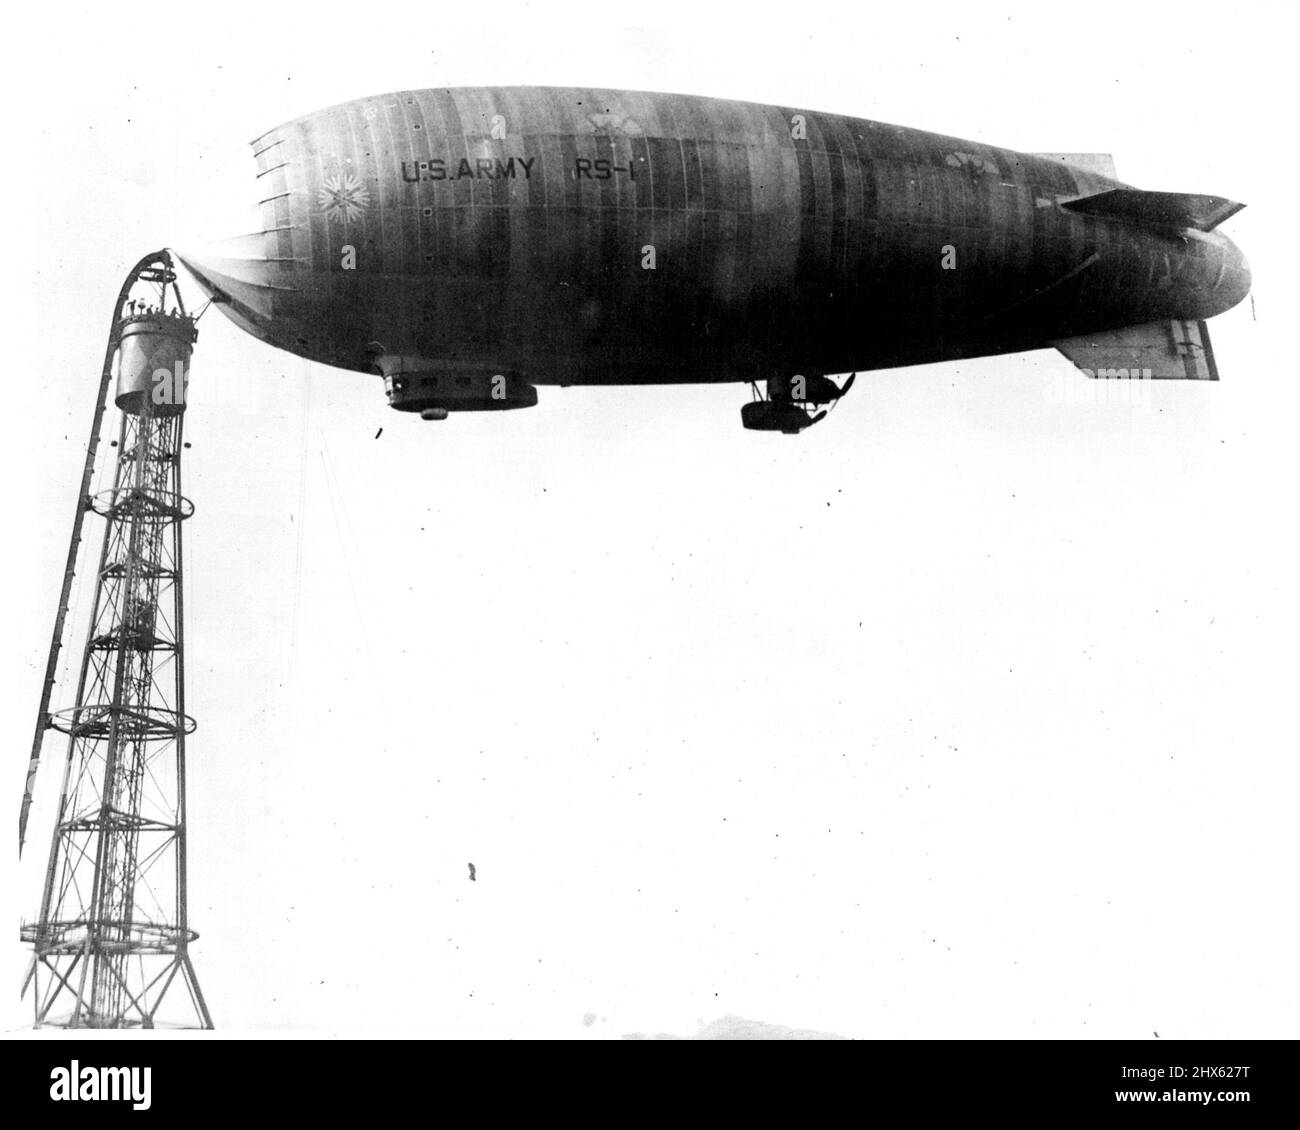 U.S. Army To Junk Dirigible Rs - 1 -- The Army dirigible R.S.1. once the pride of the Army and the largest semi rigid dirigible in the world, is to be junked. The craft was built at a cost of $600,000 - an experiment in aeronautics for which a St. Louis Junk dealer is to pay $900. August 3, 1931. (Photo by International Newreel Photo). ;U.S. Army To Junk Dirigible Rs - 1 -- The Army dirigible R.S.1. once the pride of the Army and the largest semi rigid dirigible in the world, is to be junked. Th Stock Photo